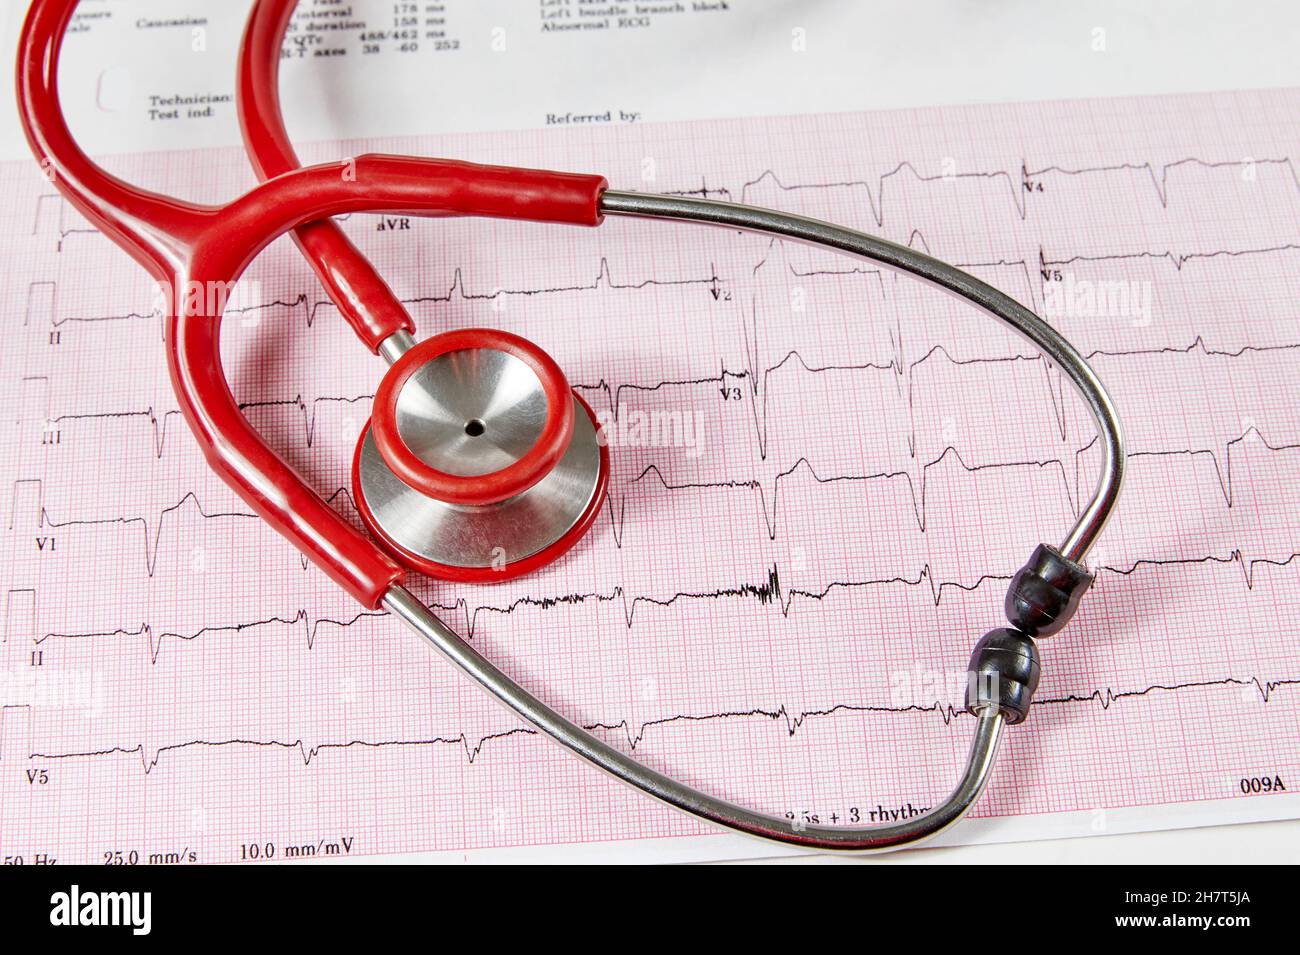 Ecocardiography report (ECG) showing irregular heartbeat with  a red stethoscope on top of it Stock Photo